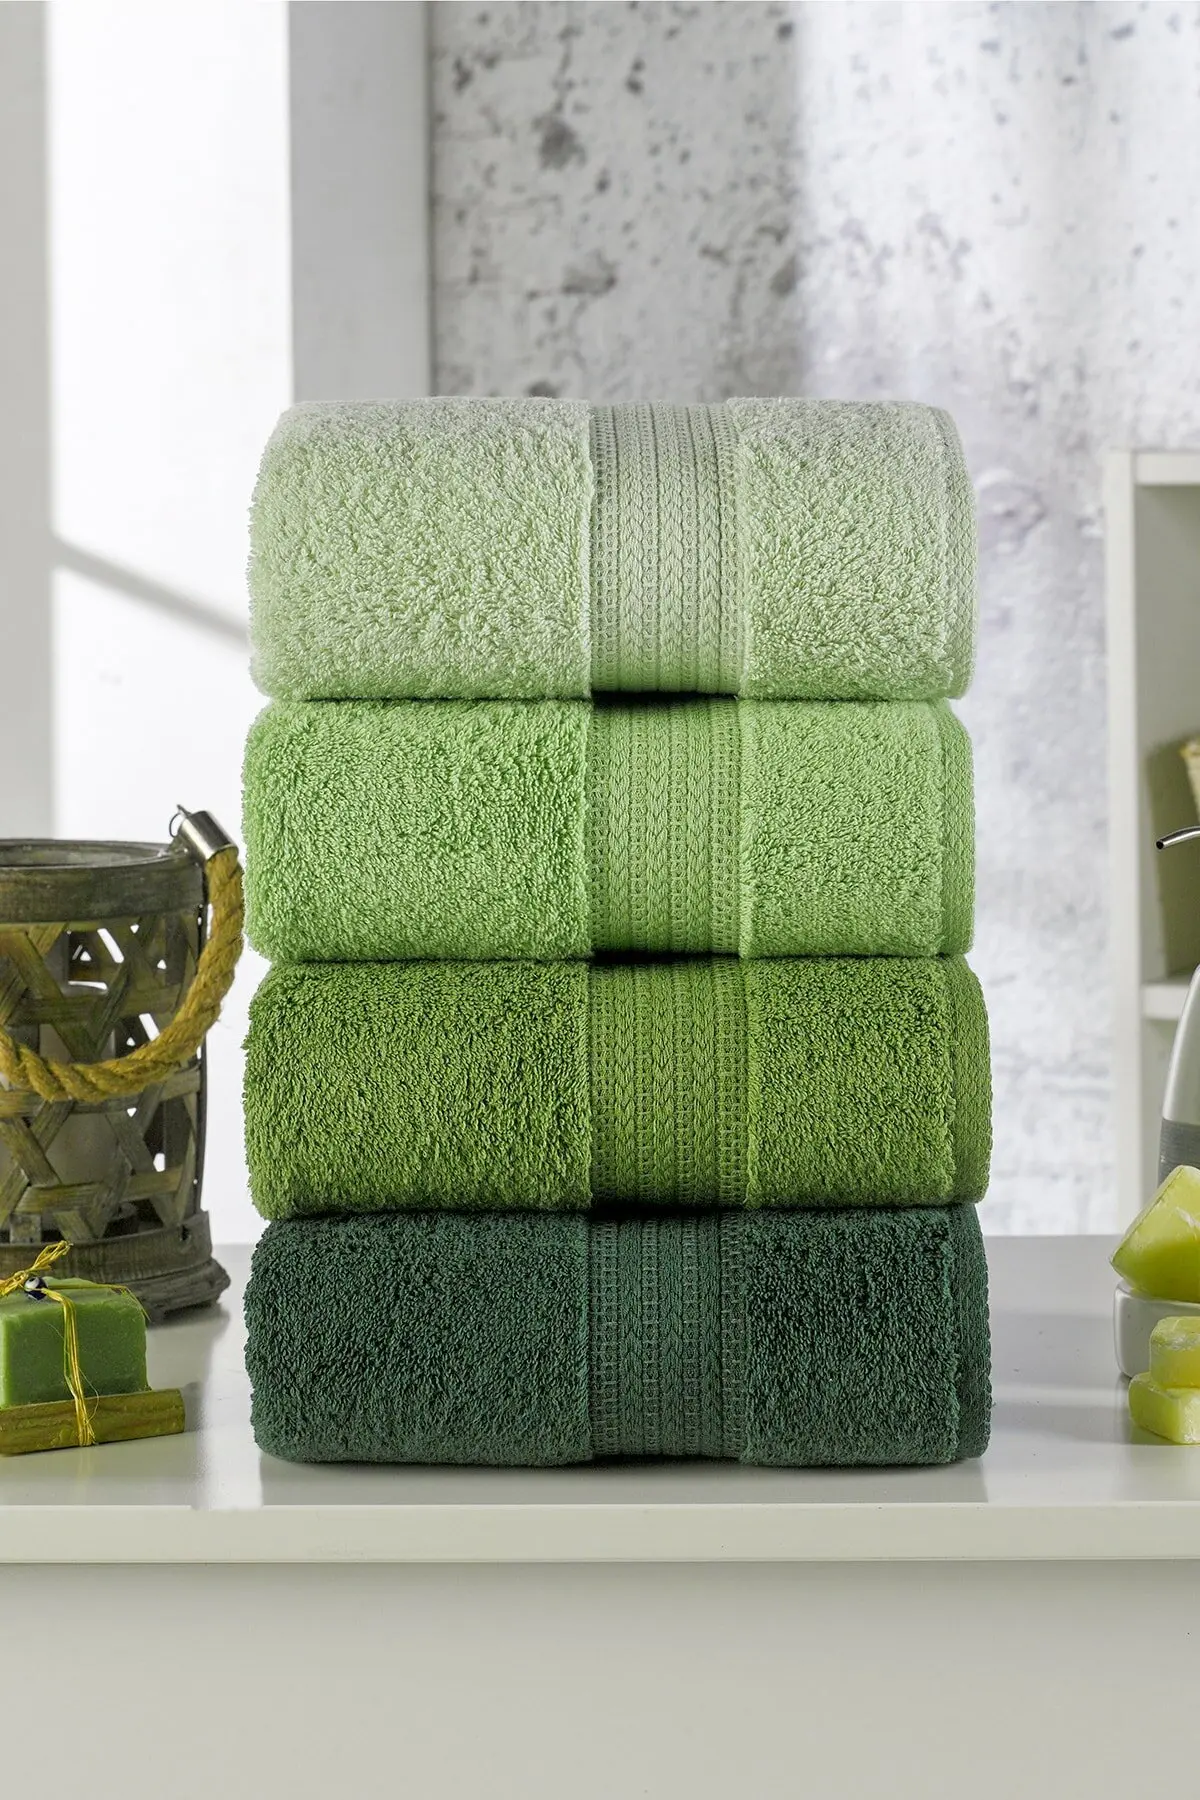 

WONDERFULSOFTTextile 100% MODA Style Cotton Green Set of 4 Towels 50x90 Cm FREE SHIPPING